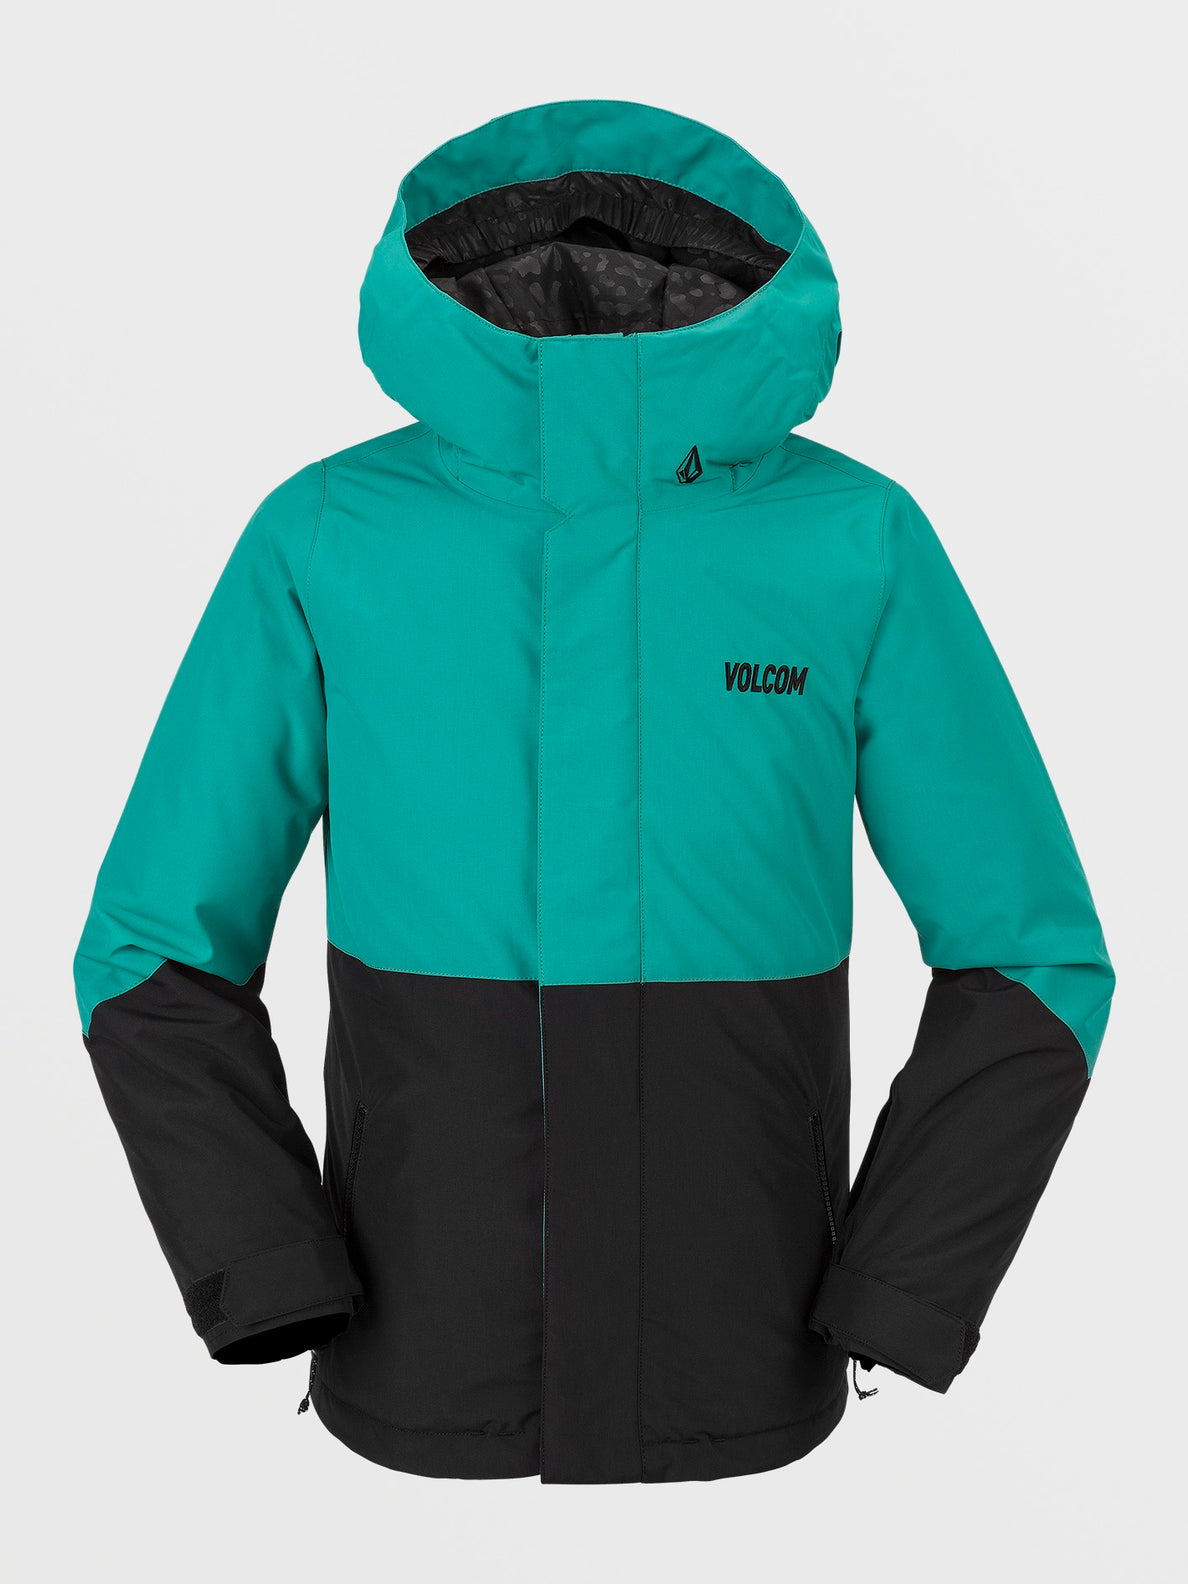 Kids Sass'N'Fras Insulated Jacket - Vibrant Green